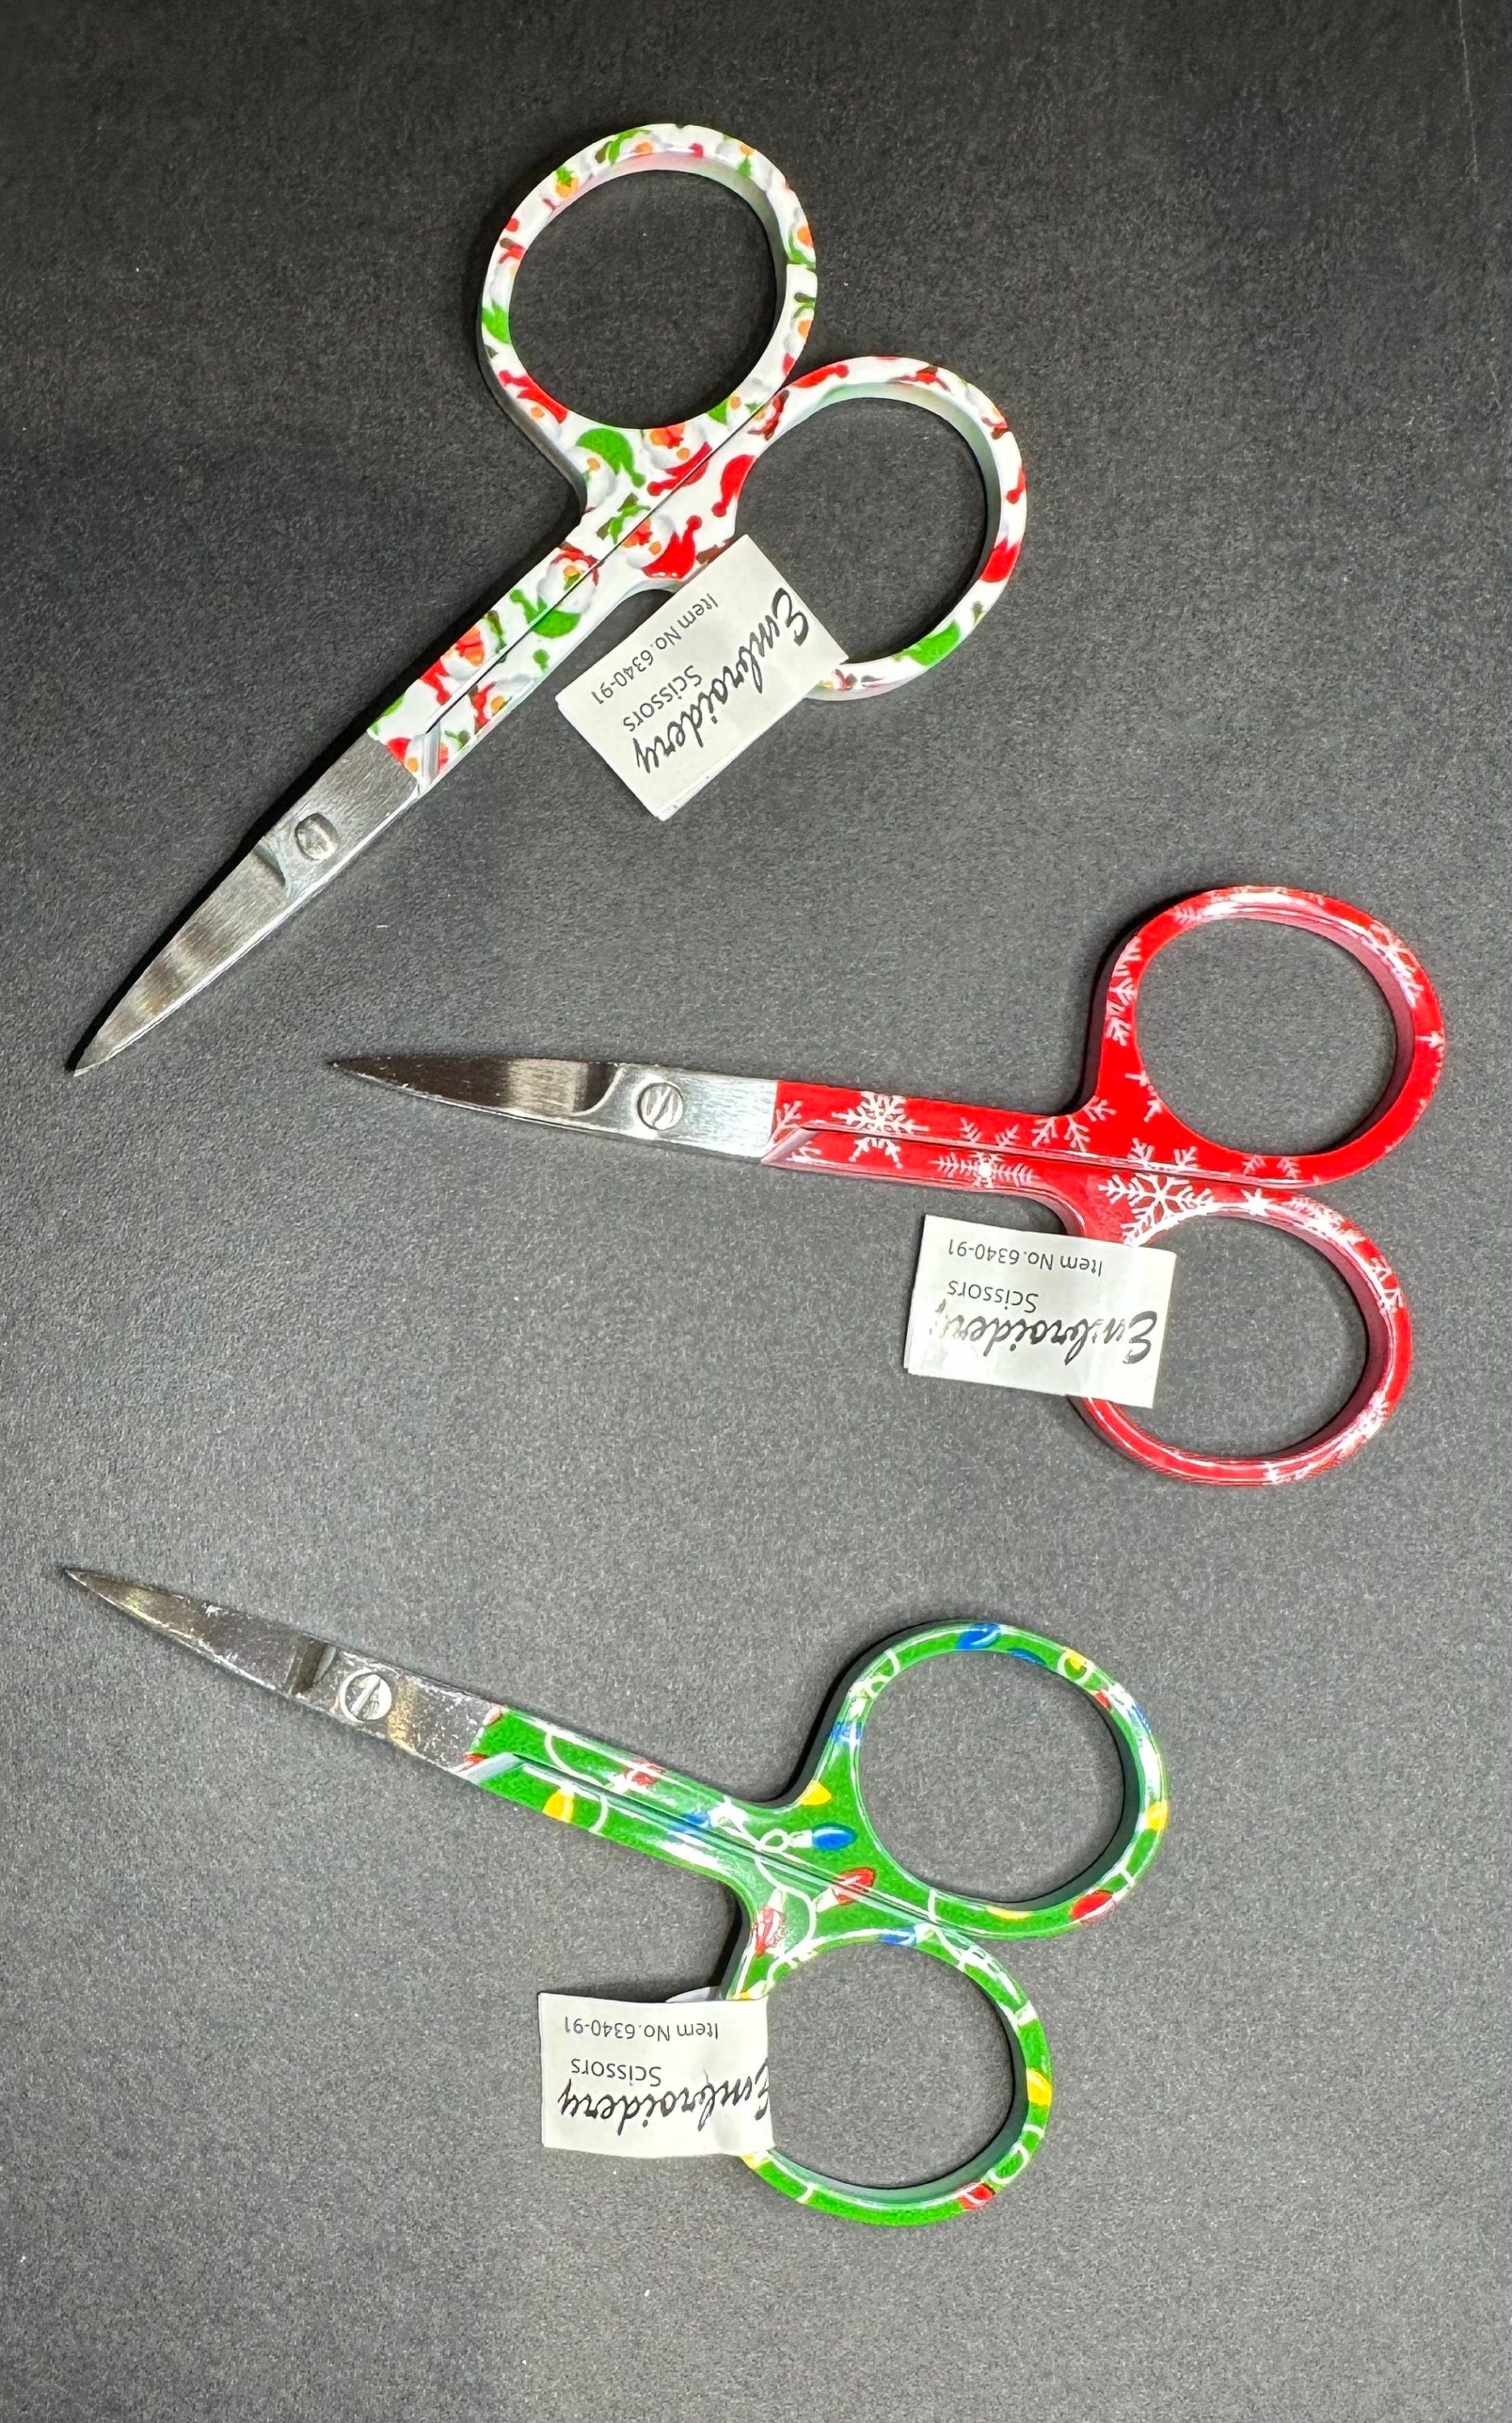 A Stitcher's Christmas #4: Embroidery Scissors! –